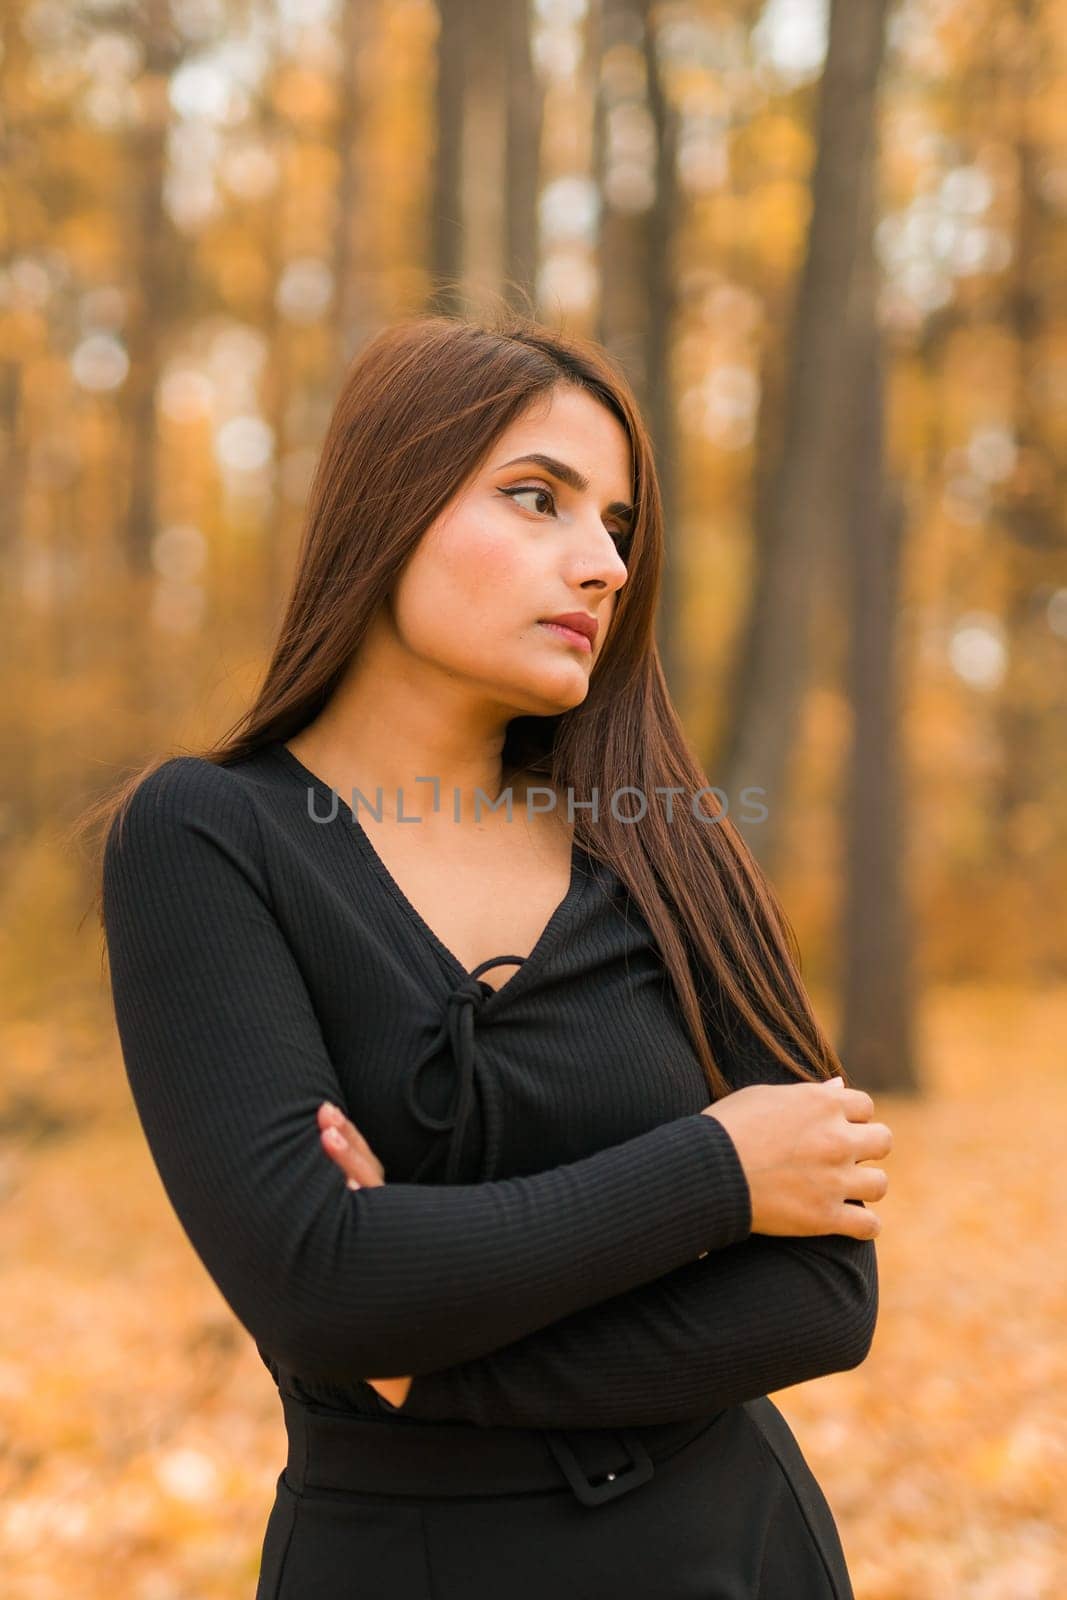 Beautiful indian woman generation z relaxing and feeling nature at autumn park in fall season. Diversity and gen z youth by Satura86